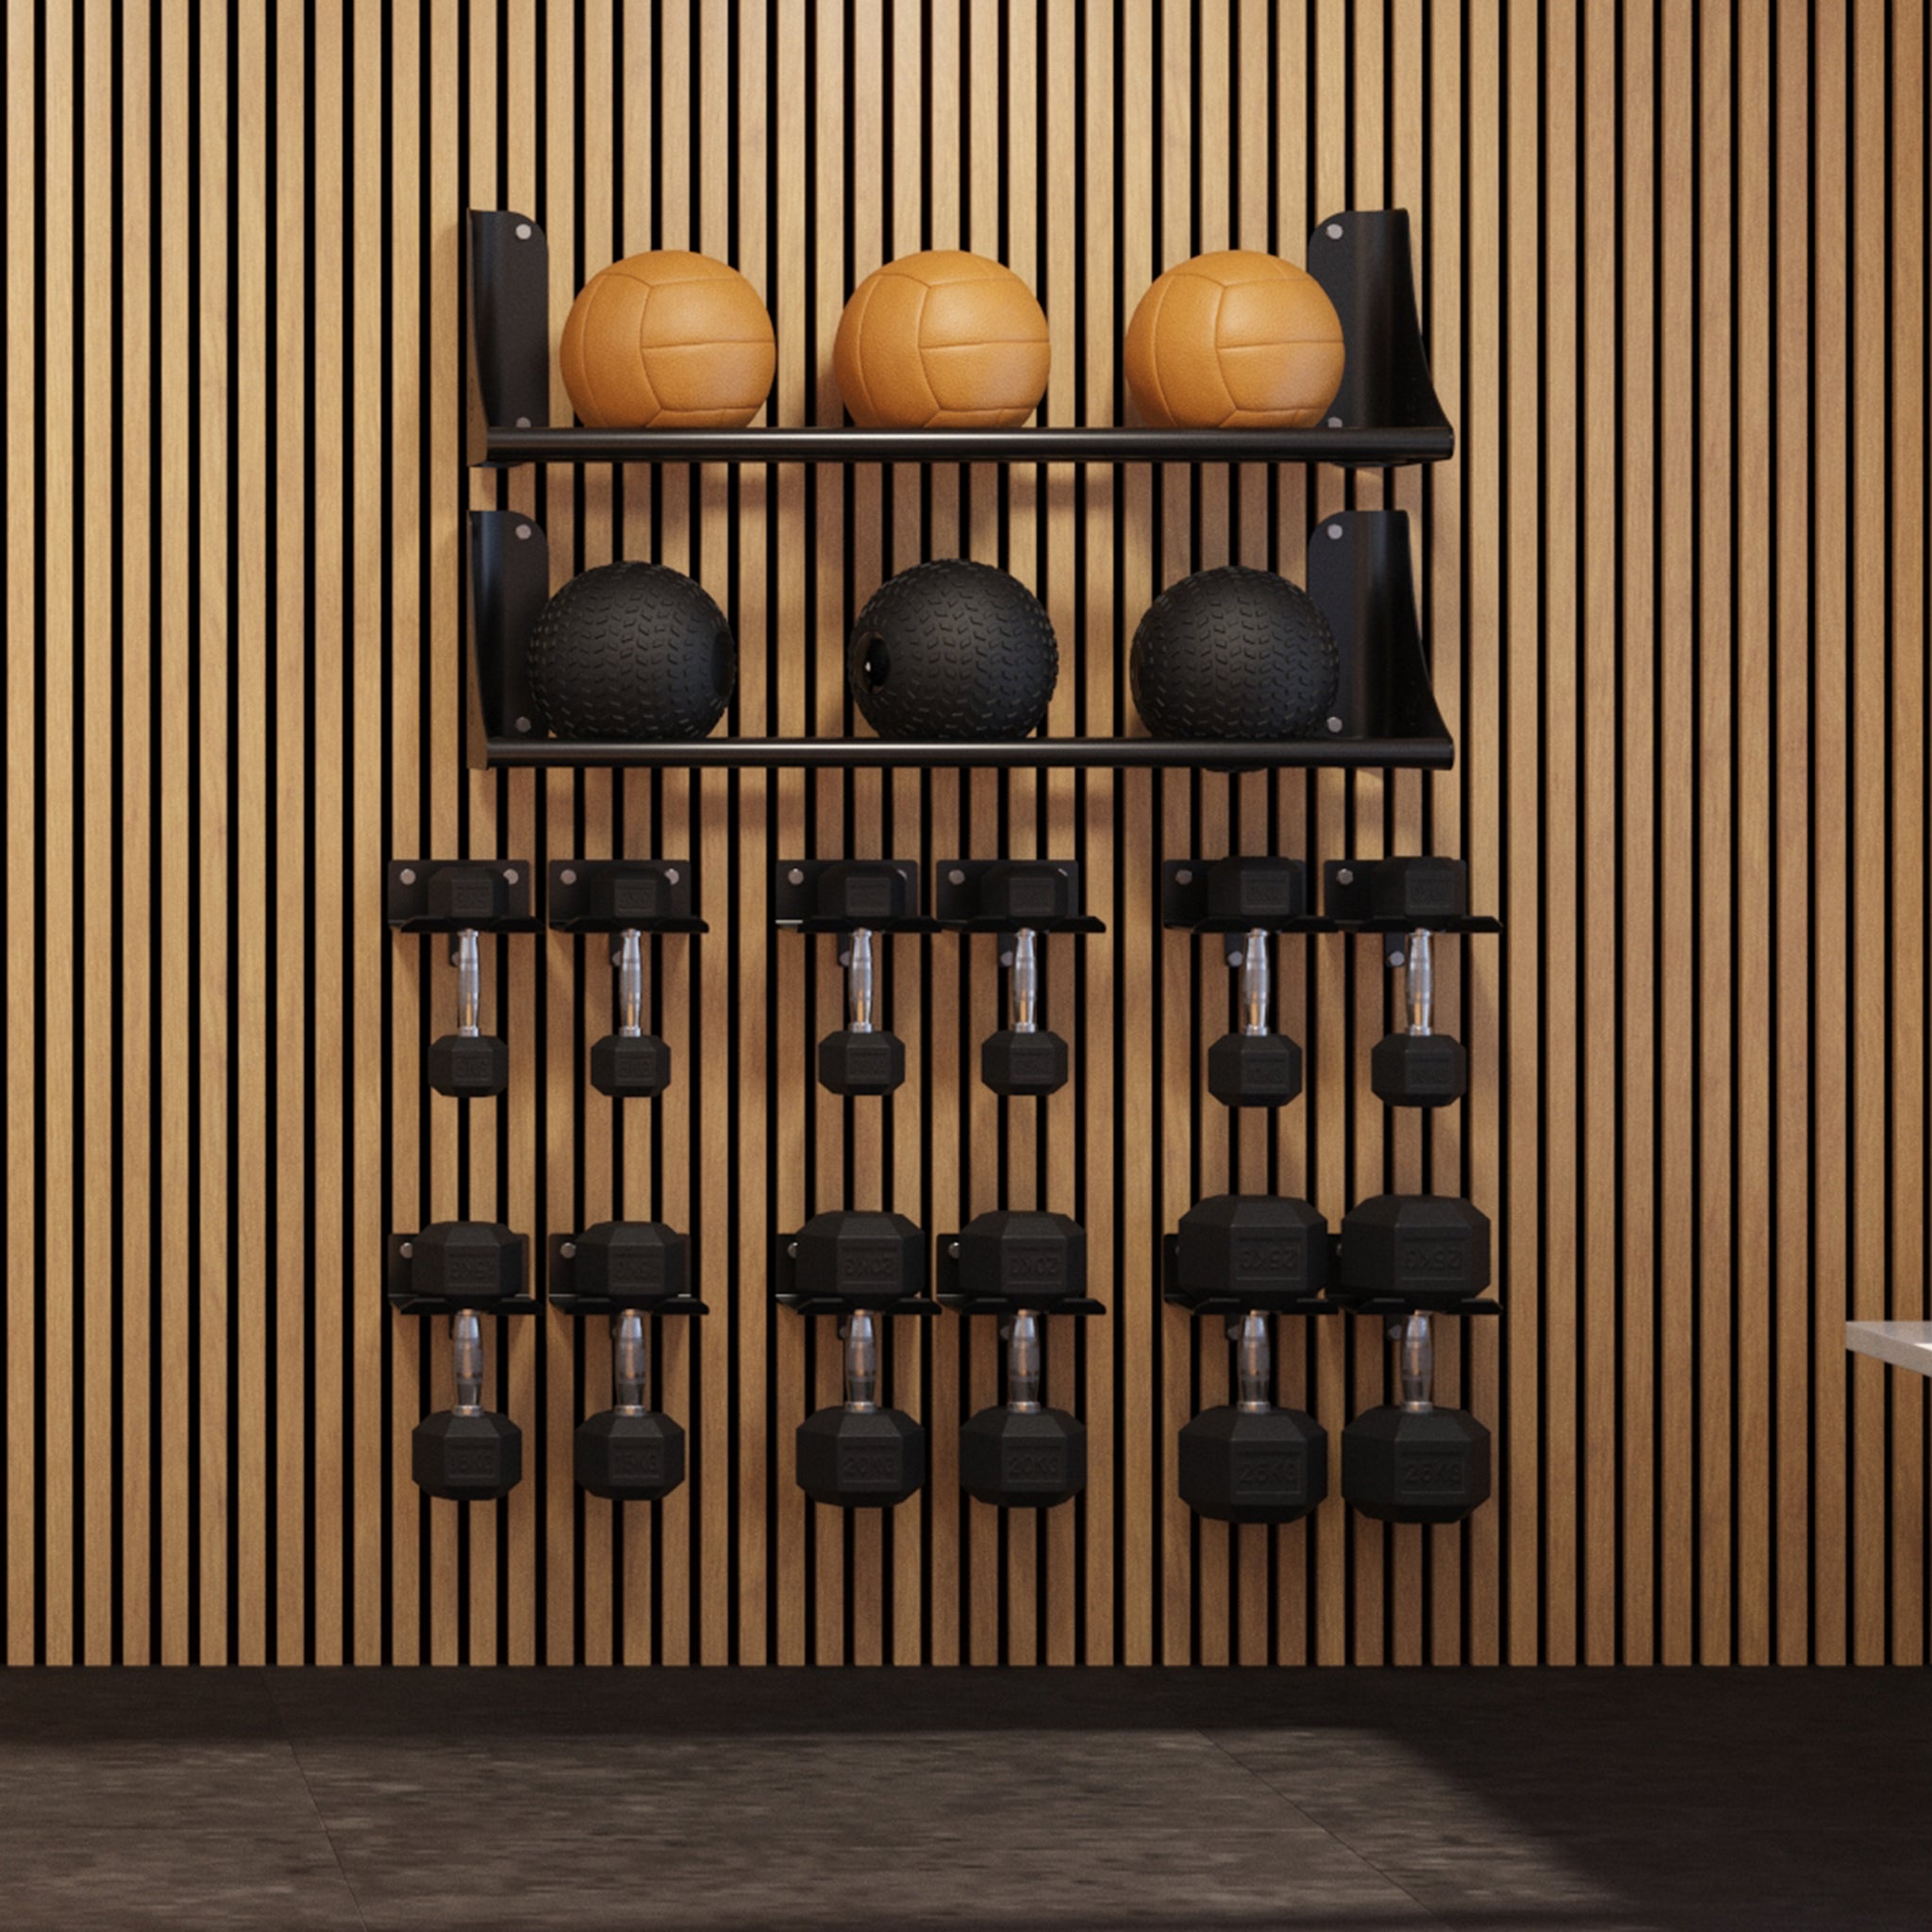 Wall Mounted Dumbbell Storage Hook (Single Dumbbell)